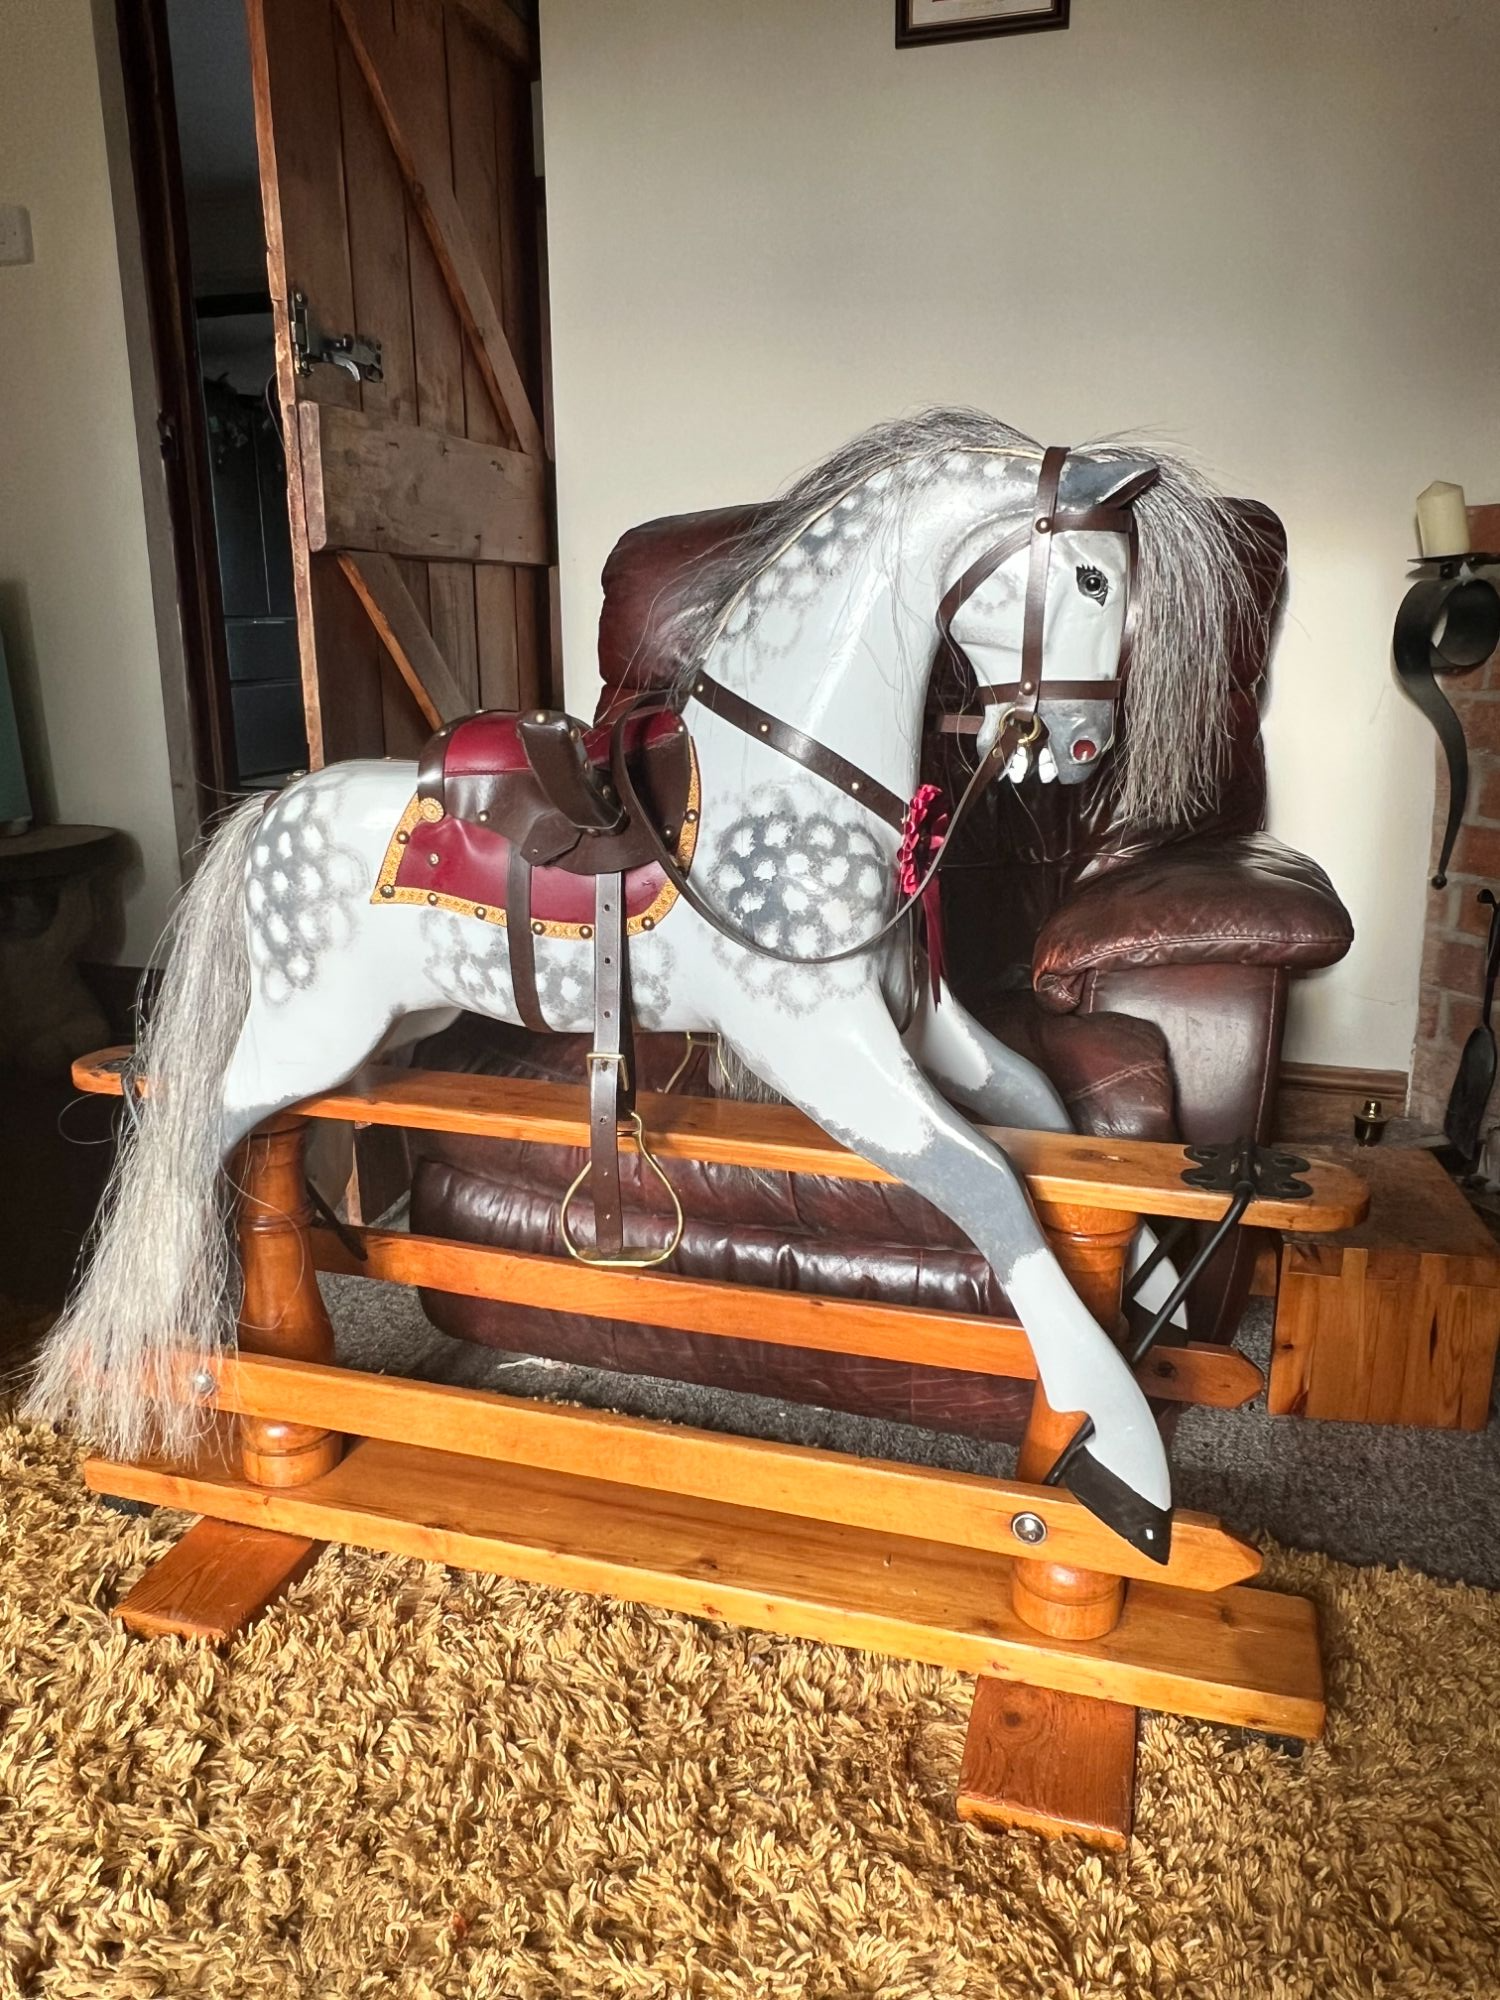 For Sale - F H Ayres rocking horse